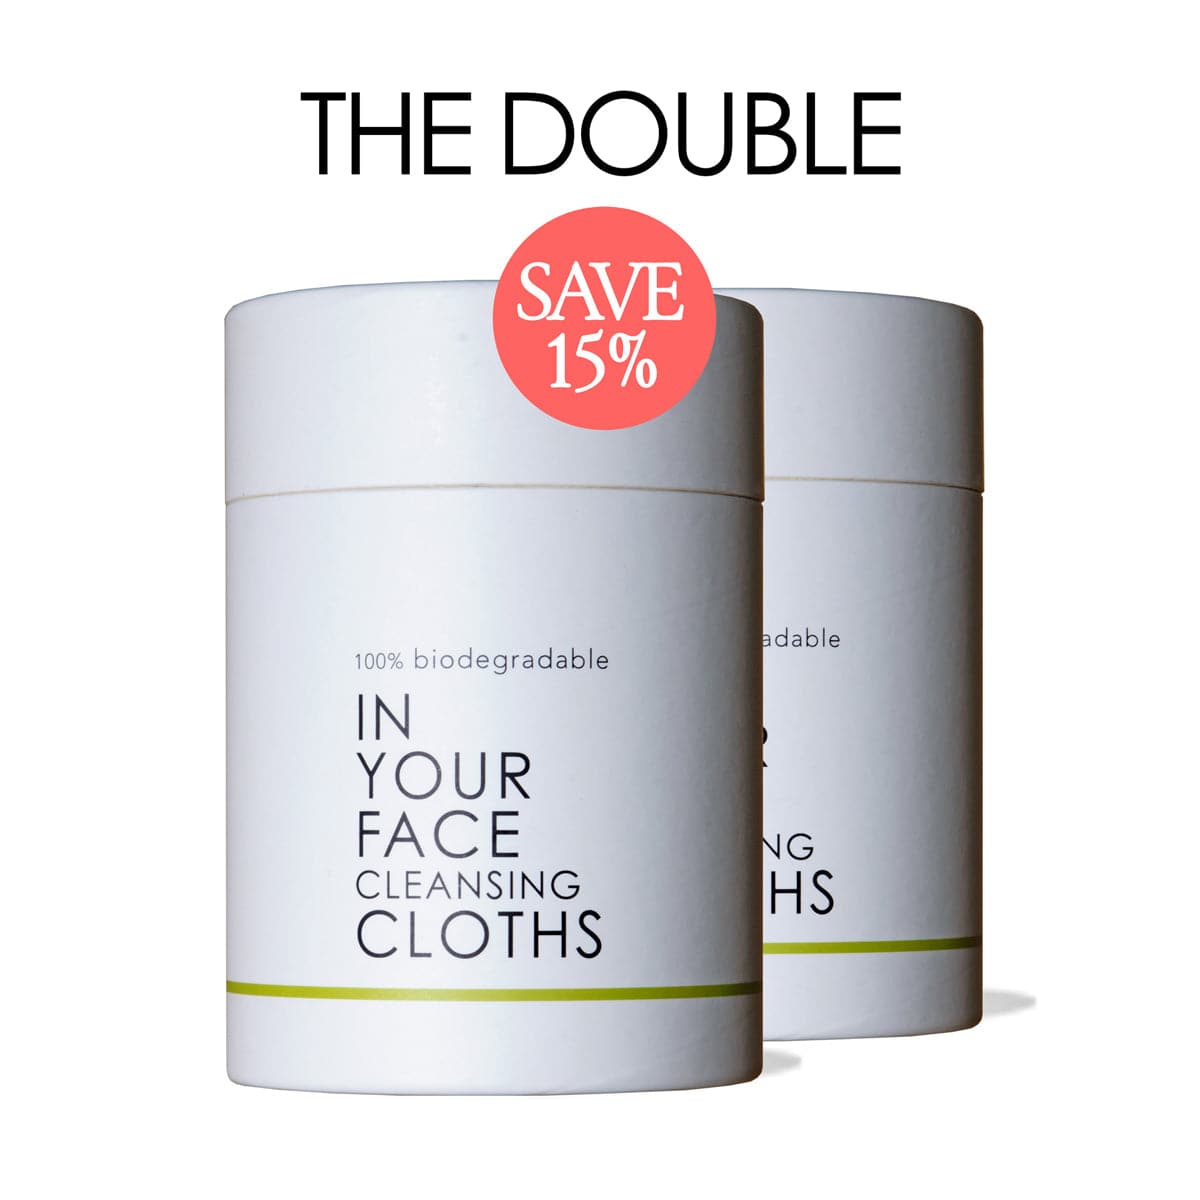 A photo of 2 containers of the CLEANSING CLOTHS with a badge that says "save 15%" and the text says "THE DOUBLE".